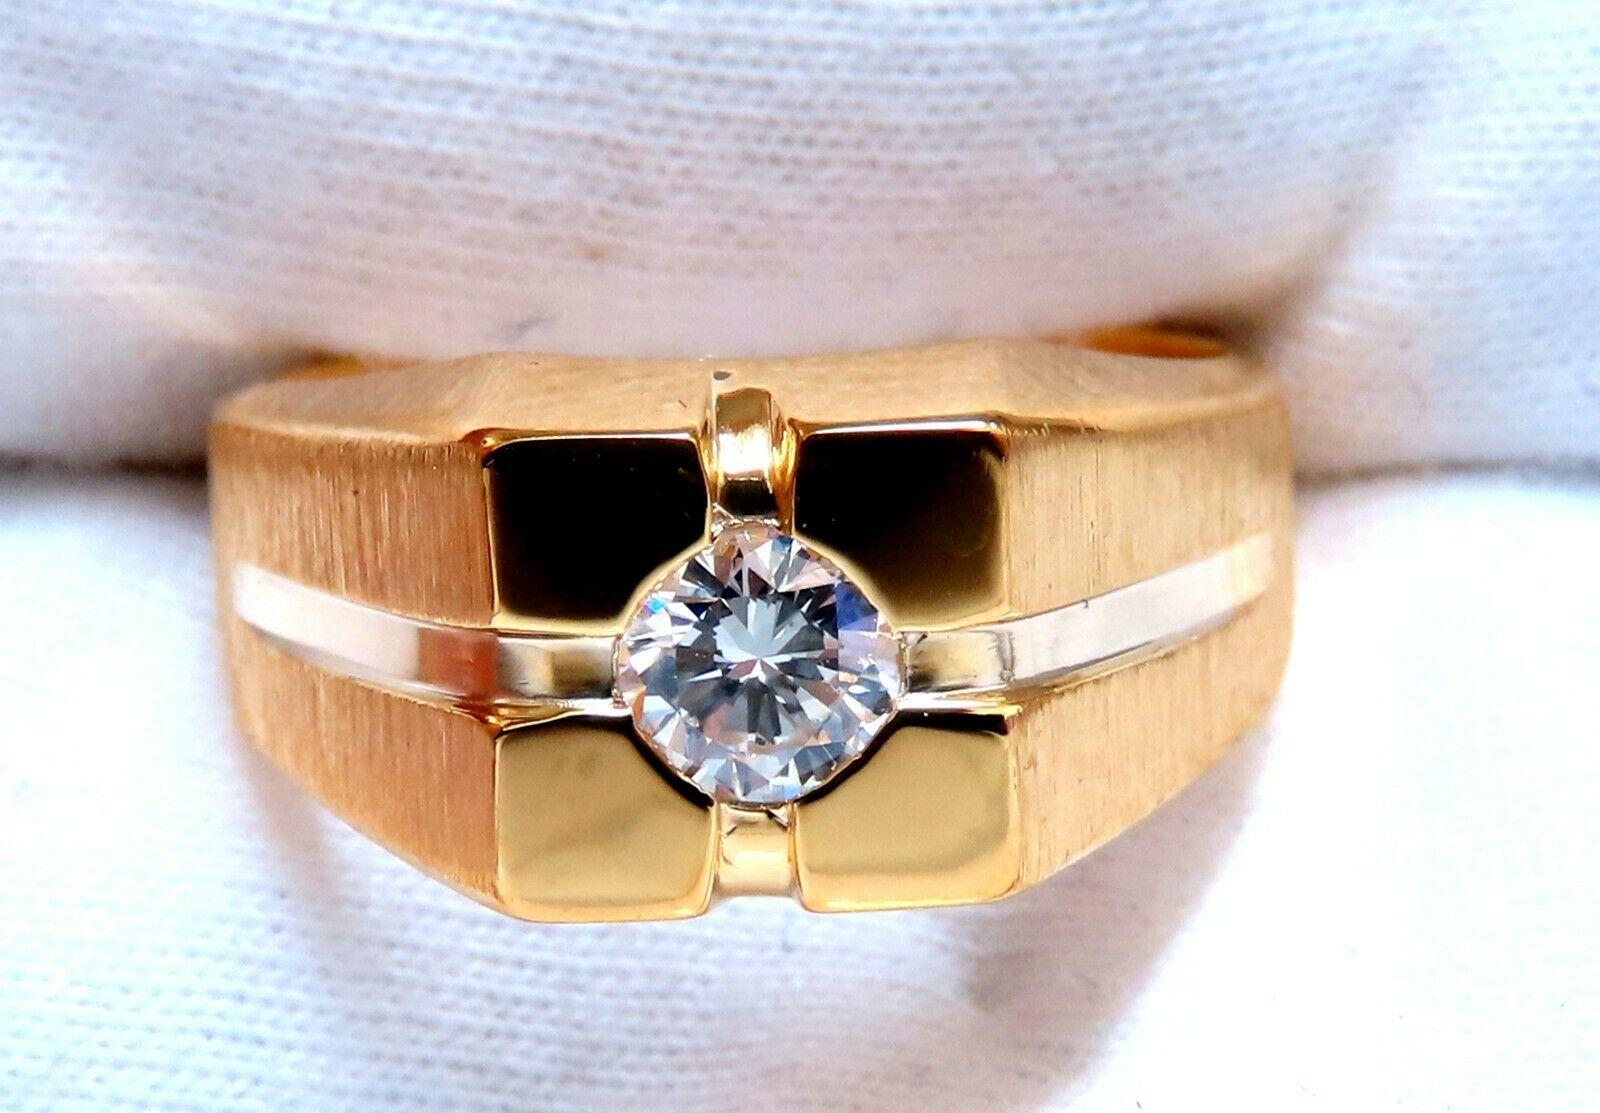 Men's round diamond & brush finish ring.

.60ct. center round diamond.

Full Cut, Brilliant

Vs-2 clarity

G-color

Ring Width: 10mm diameter

Natural, Earth Mined.

14kt. yellow gold.

7.2 grams.

current ring size: 8

We may resize, please